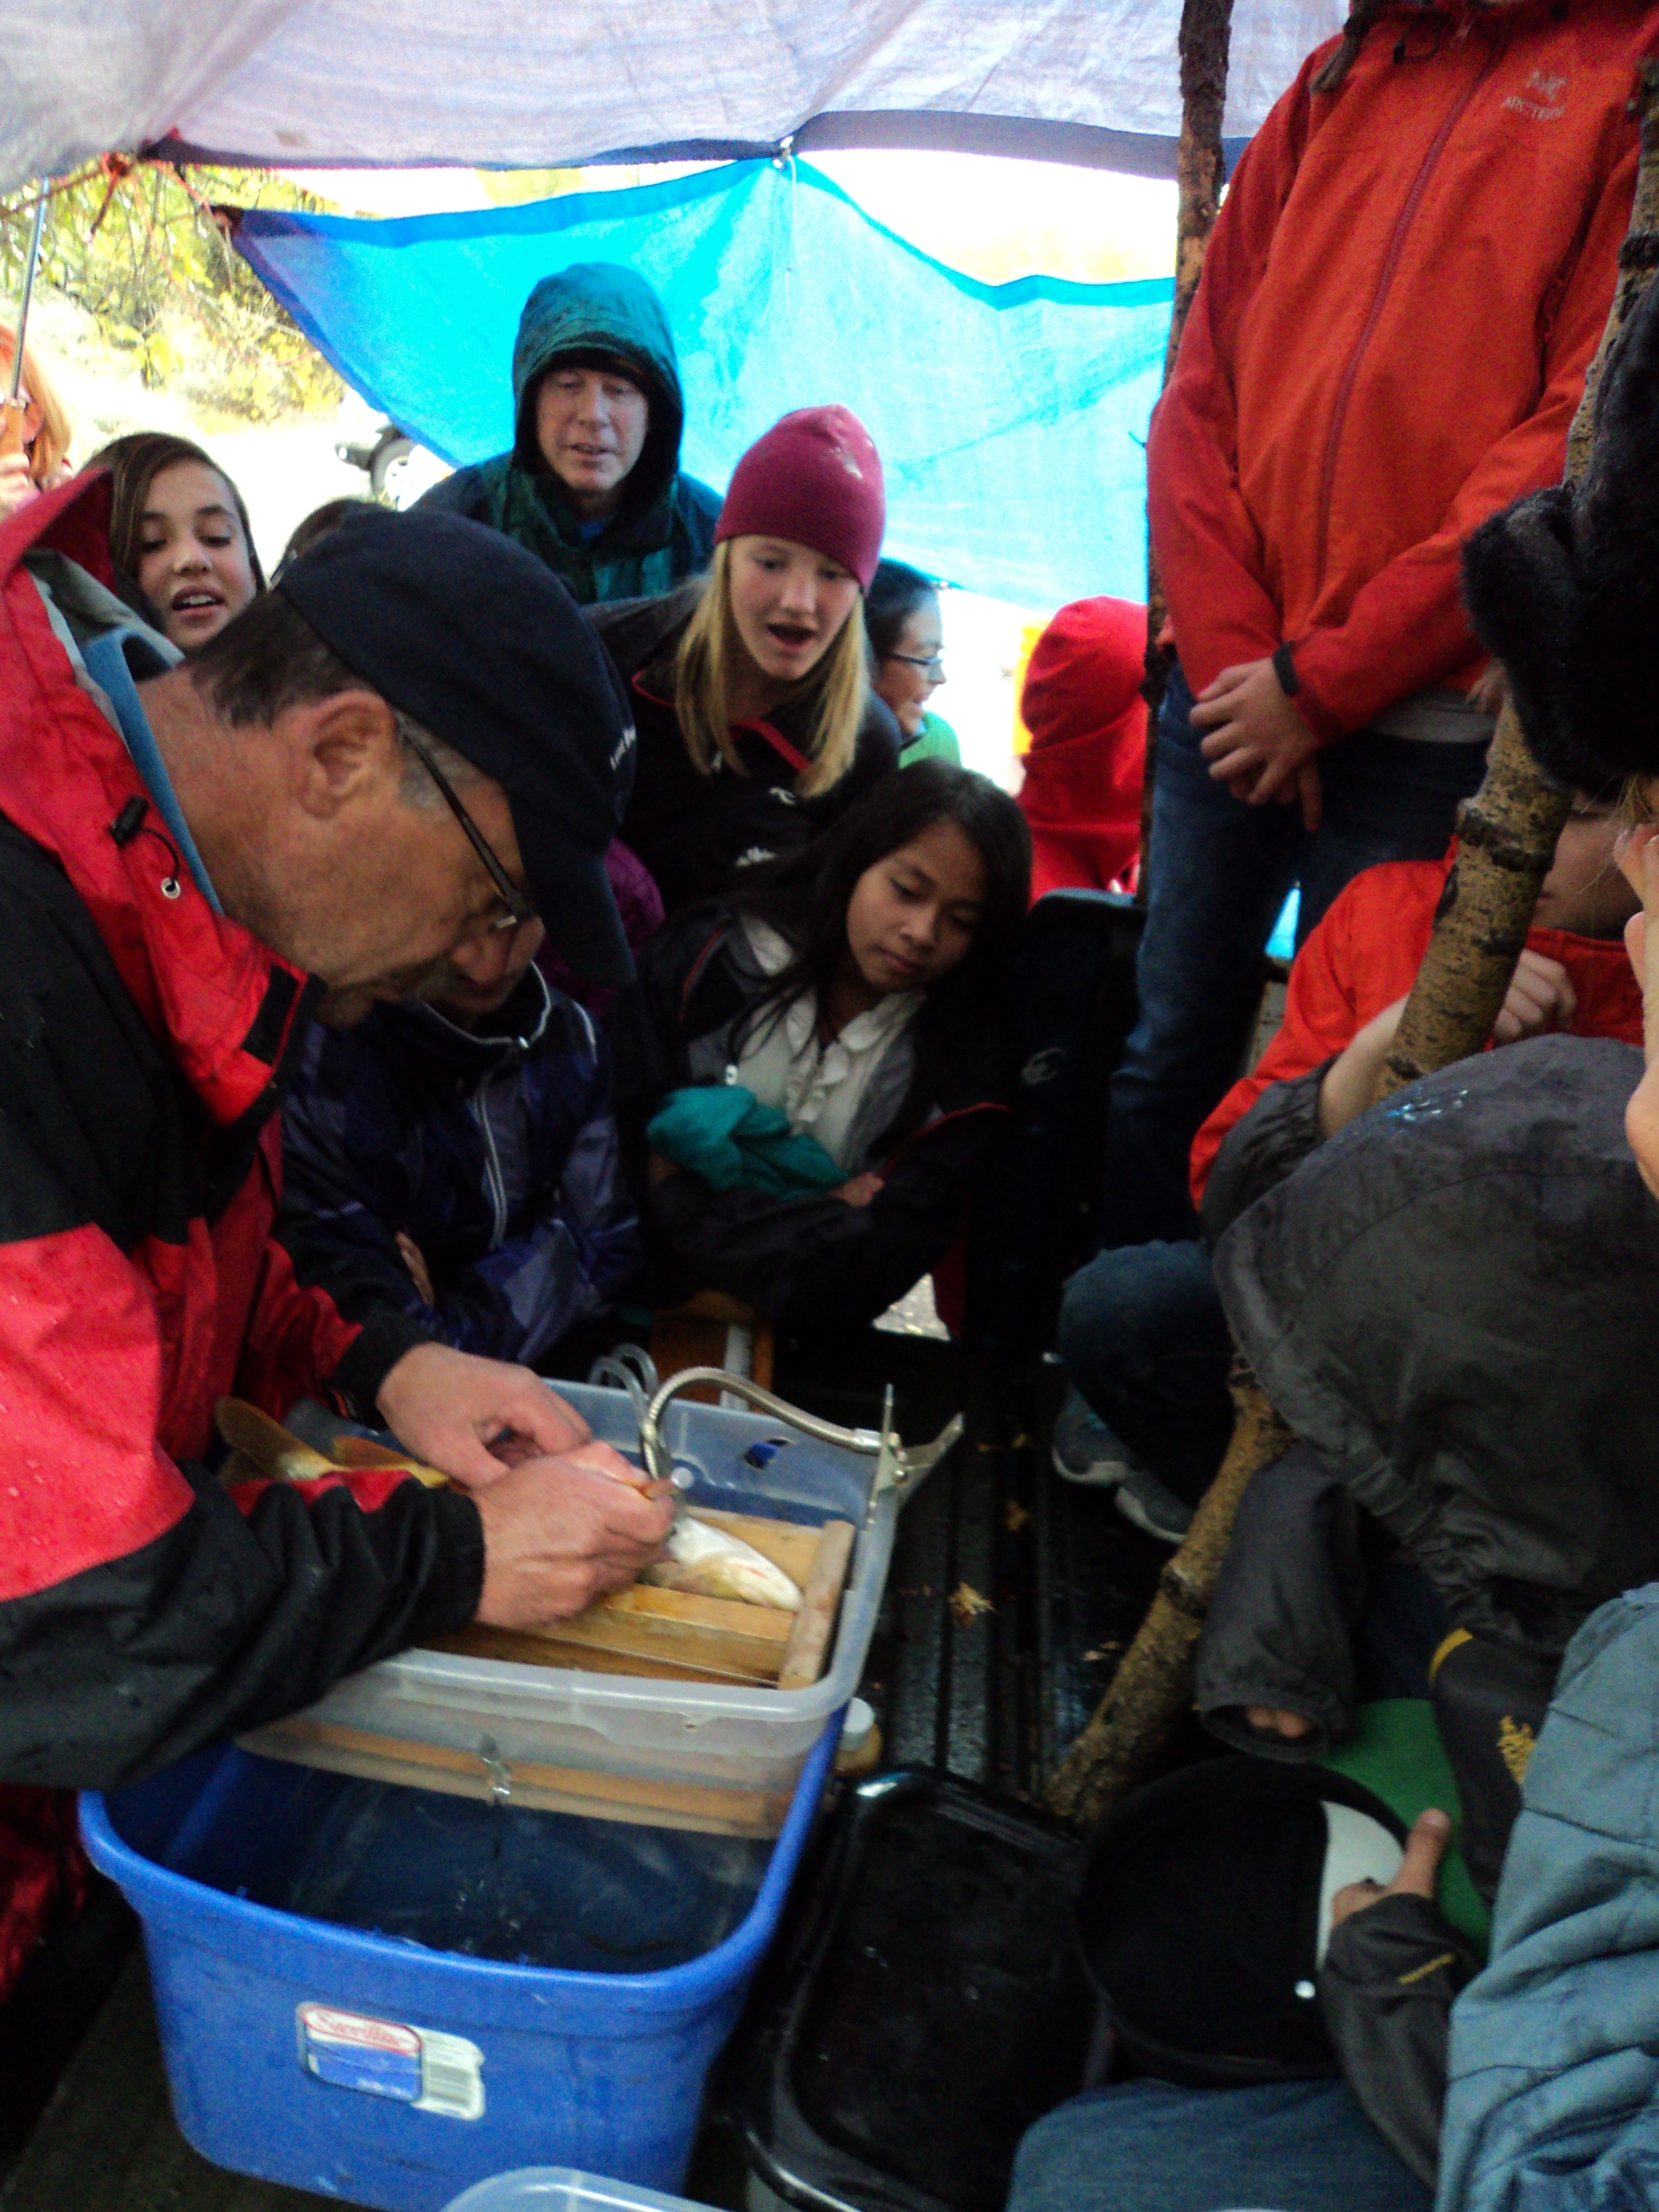 Students look on with amazement as a biologist implants a radio tracking device into a captured trout.